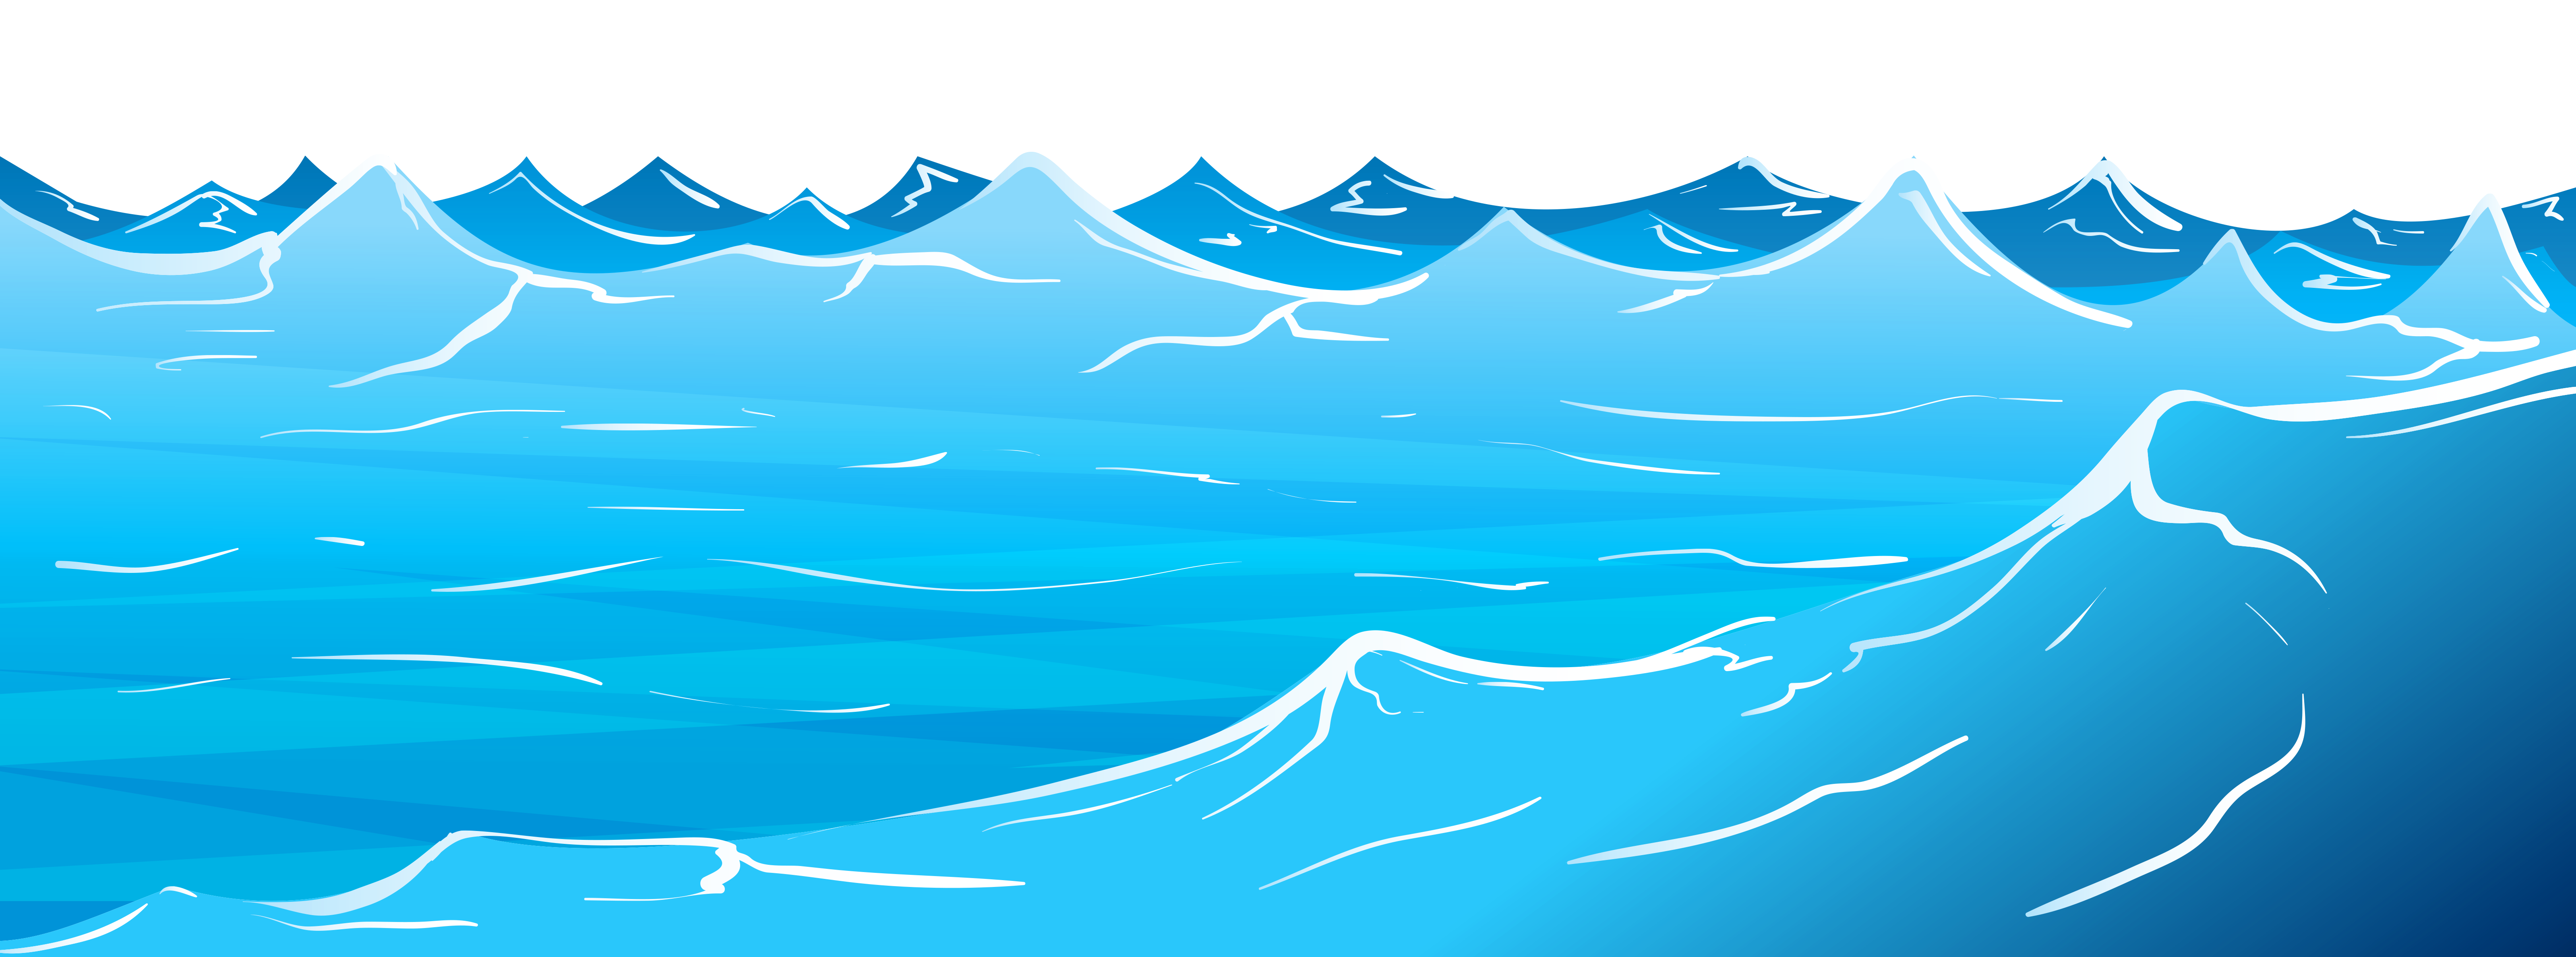 wave clipart png - photo #46